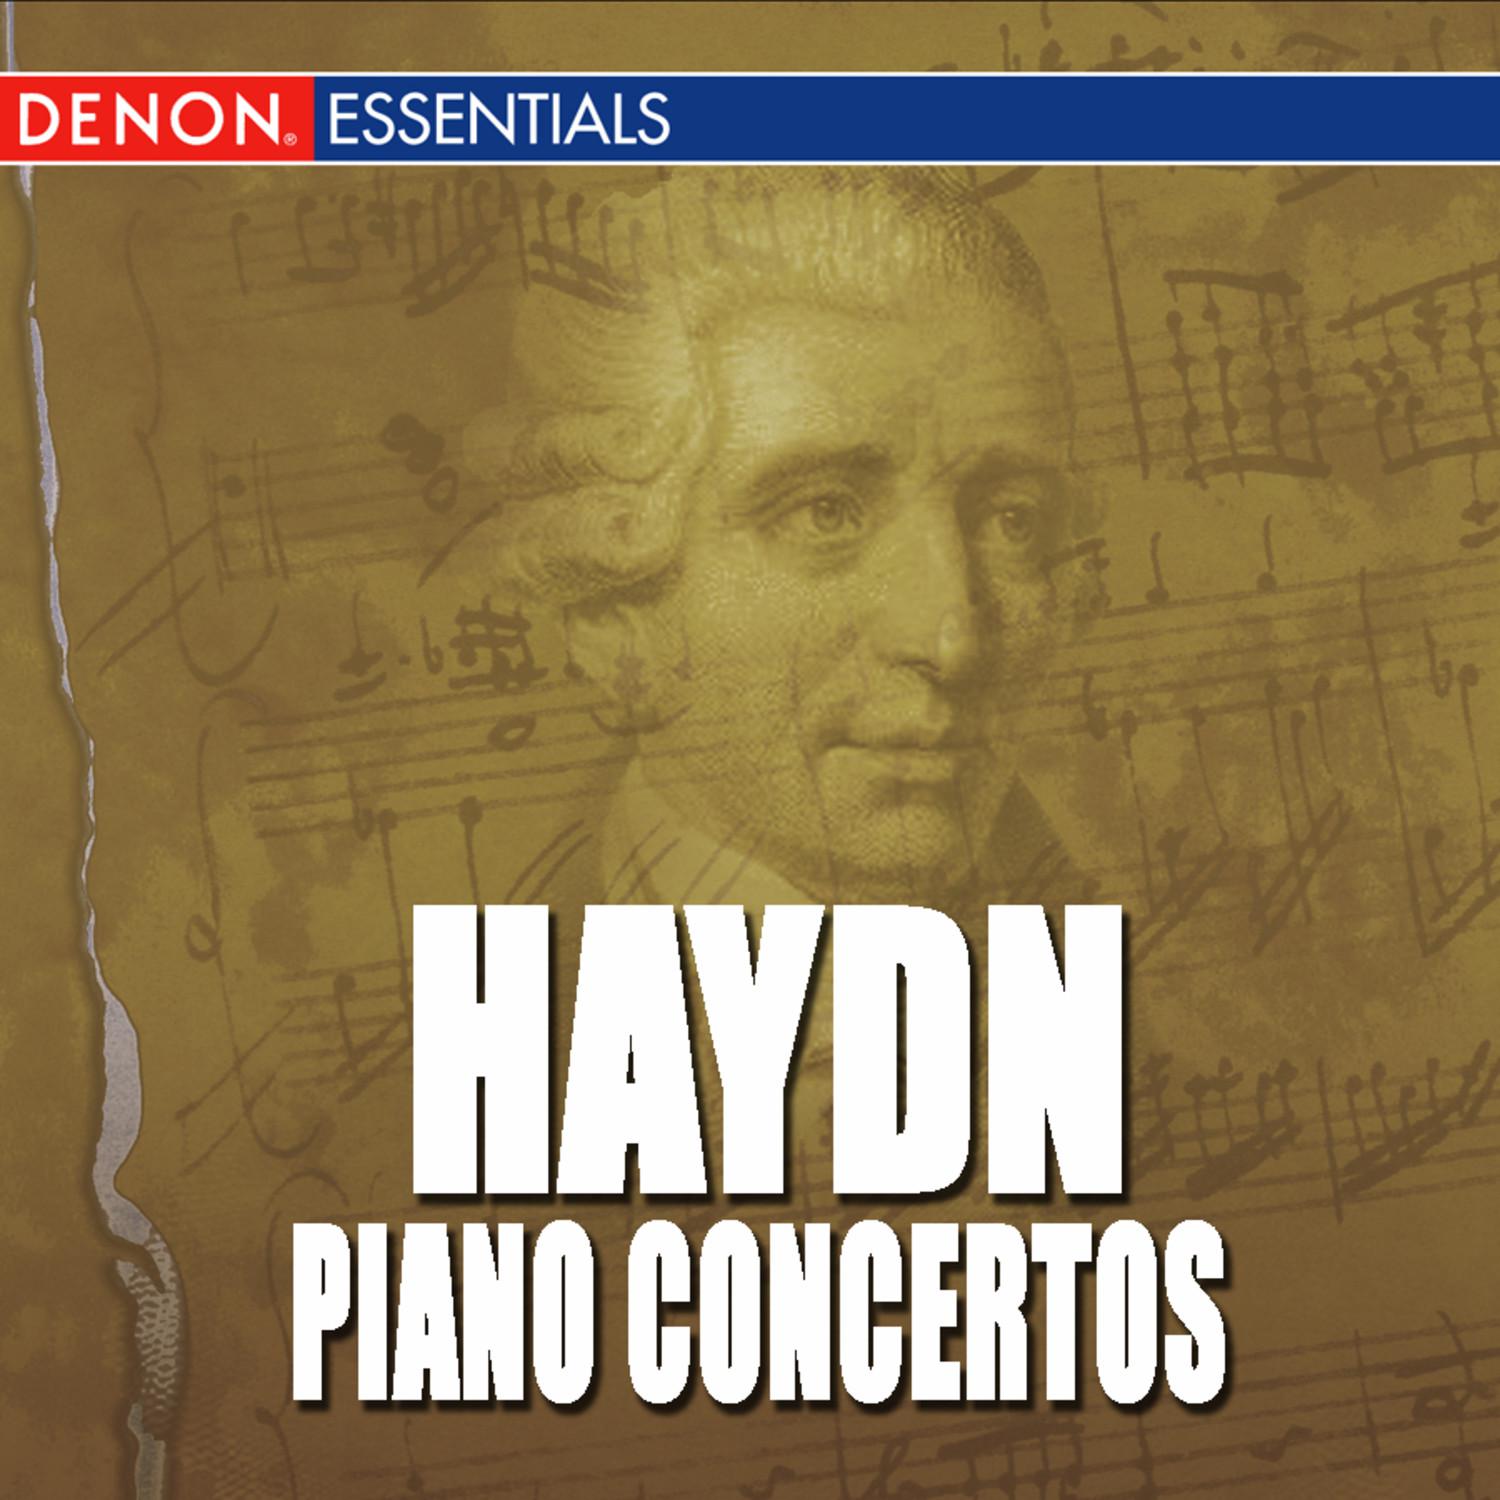 Concerto for Piano and Orchestra No. 3 in F Major, Op. 4: I. Allegro